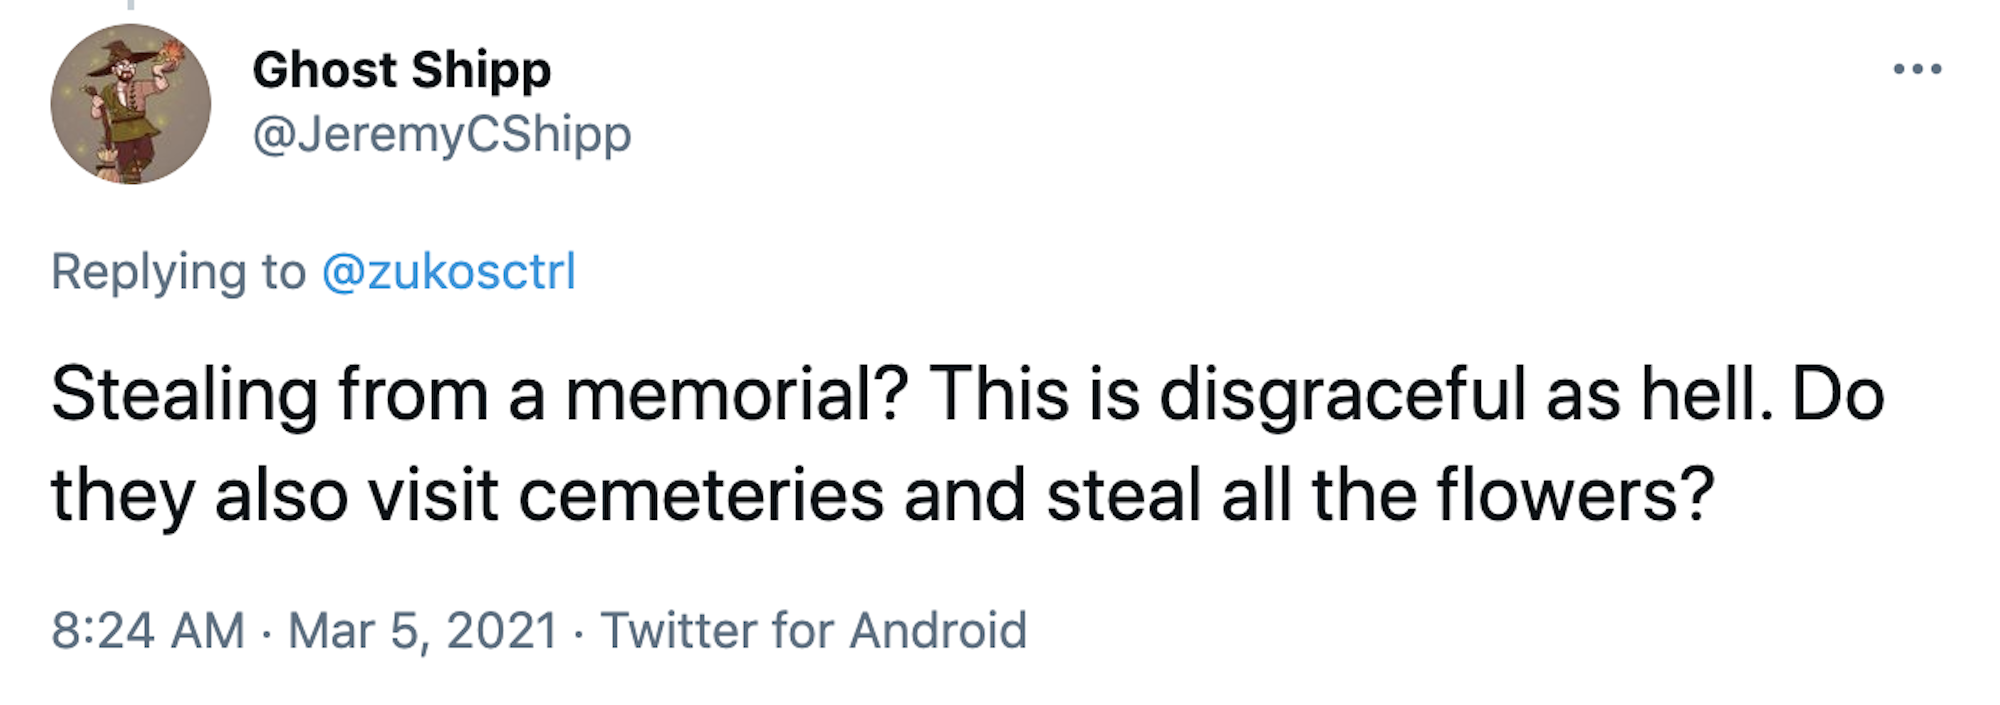 Stealing from a memorial? This is disgraceful as hell. Do they also visit cemeteries and steal all the flowers?